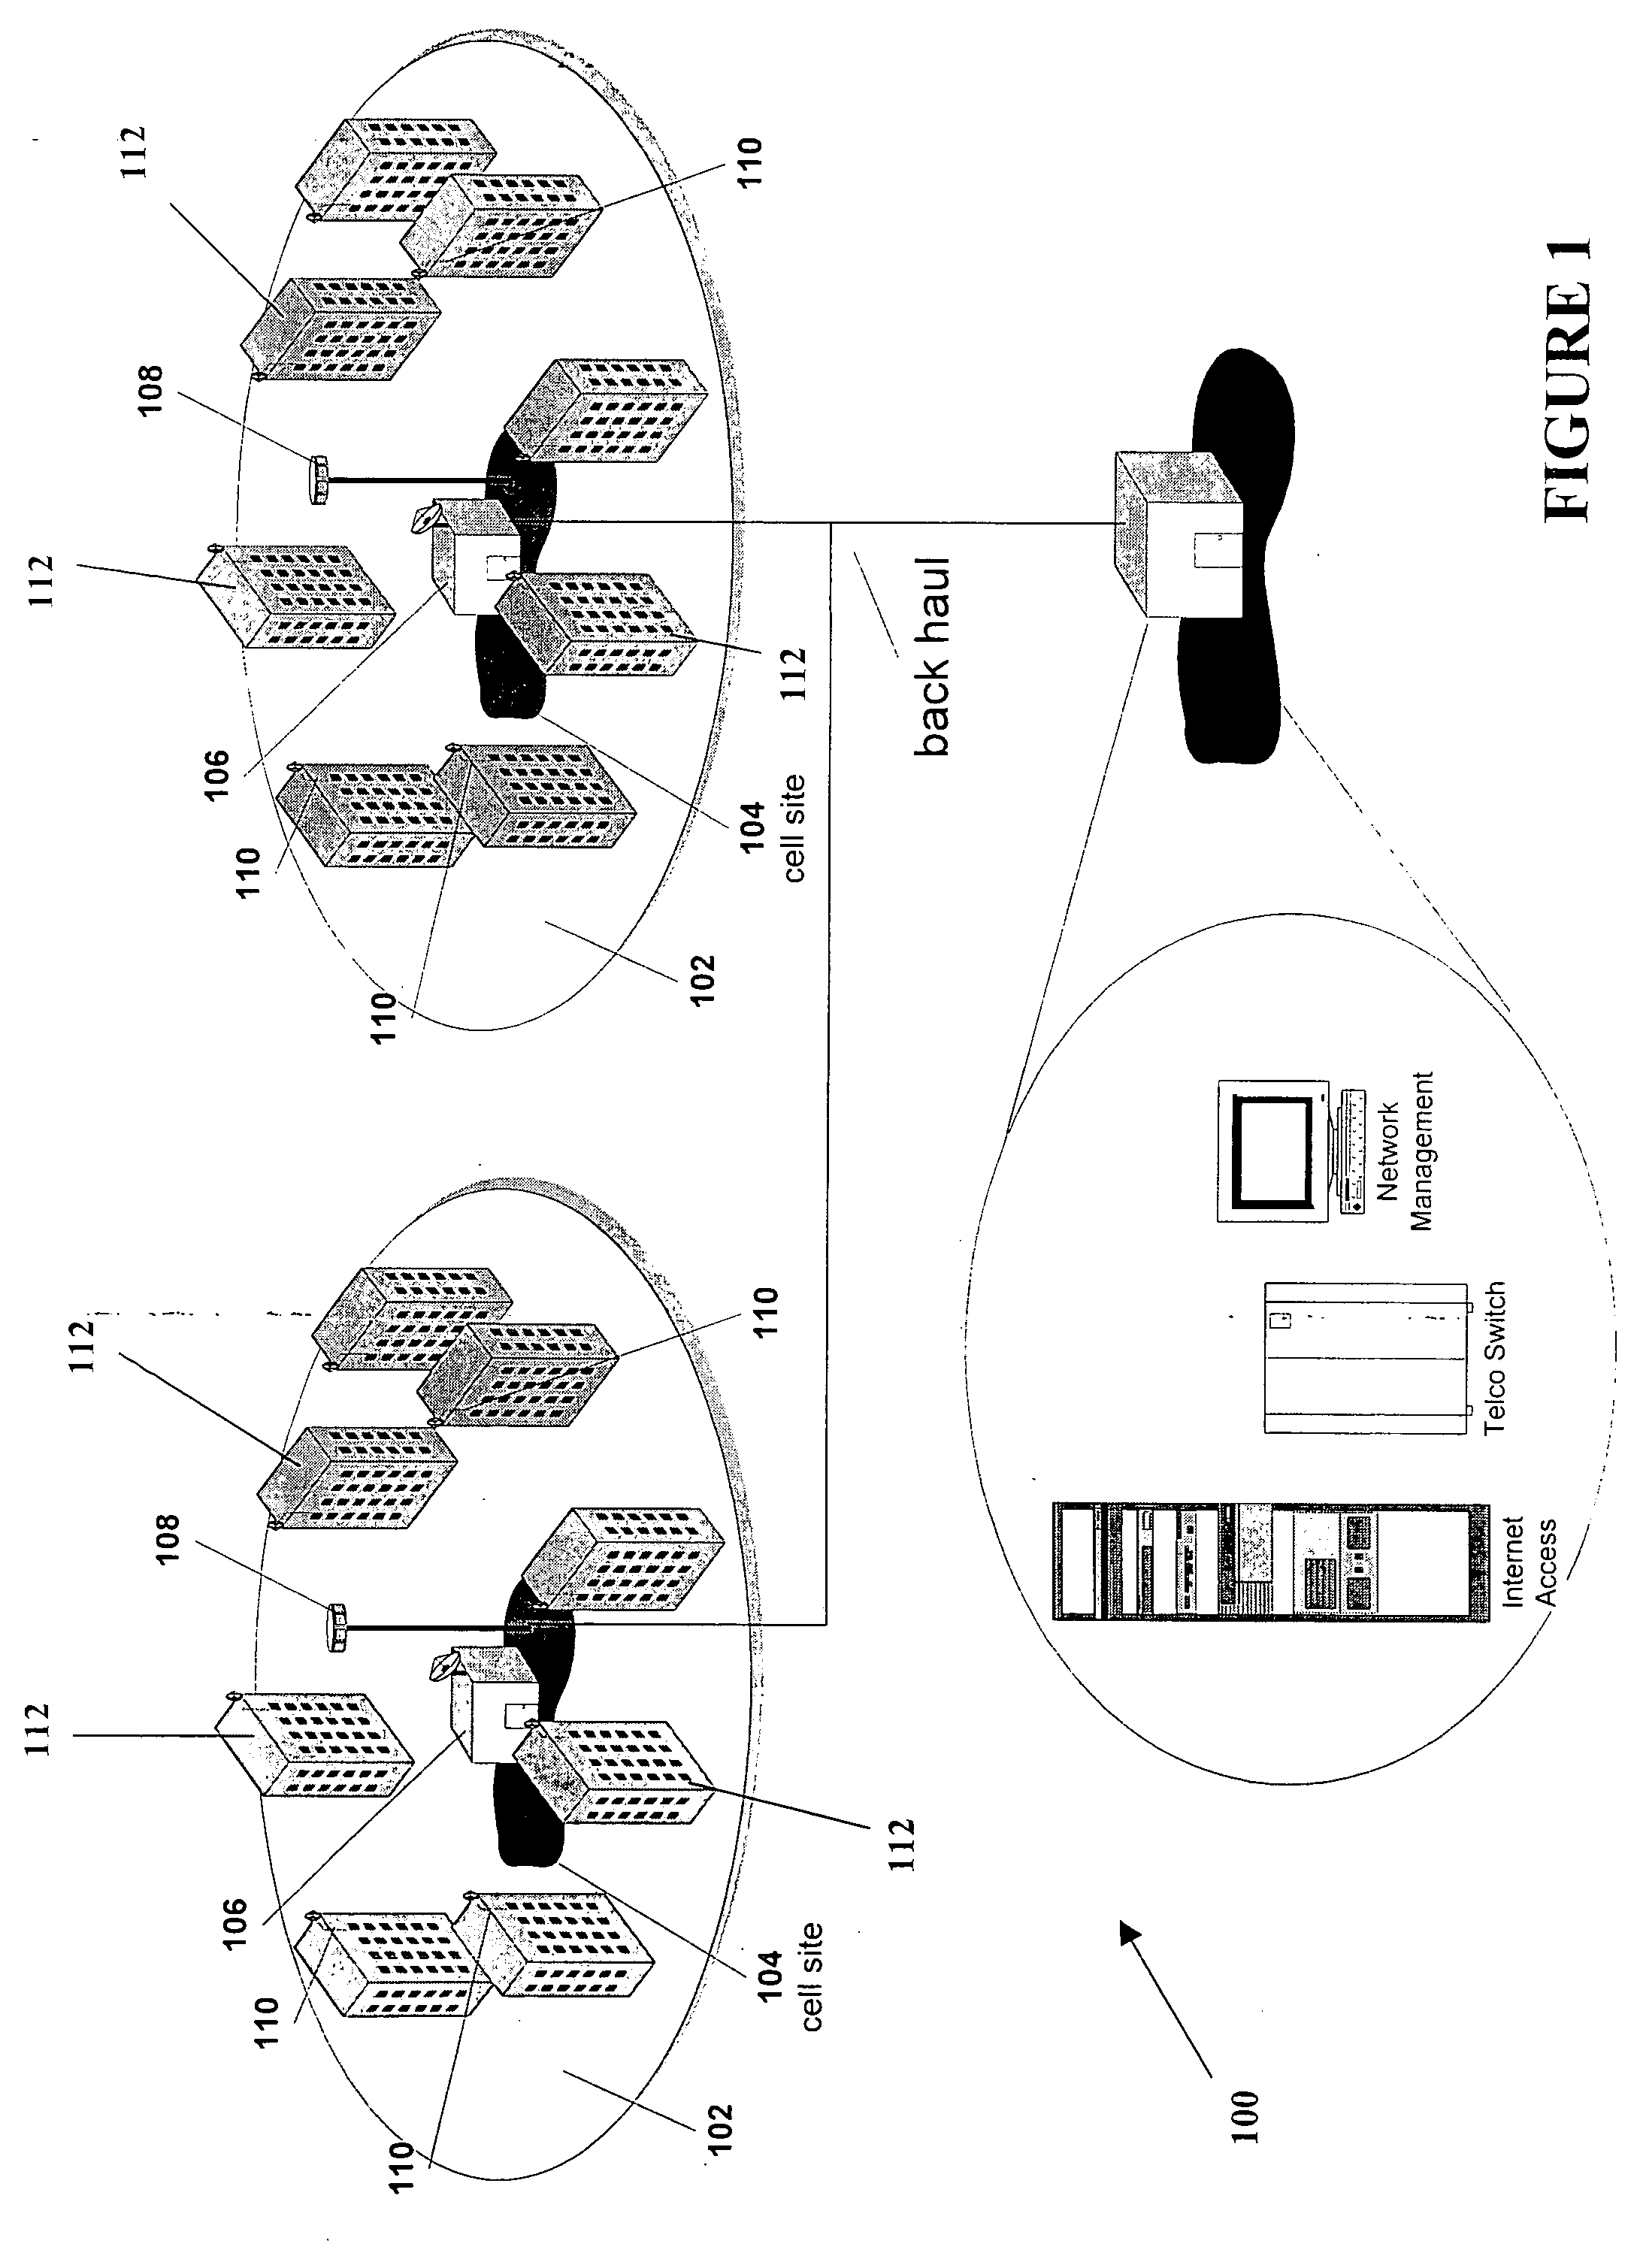 Method and apparatus for concatenated channel coding with variable code rate and coding gain in a data transmission system